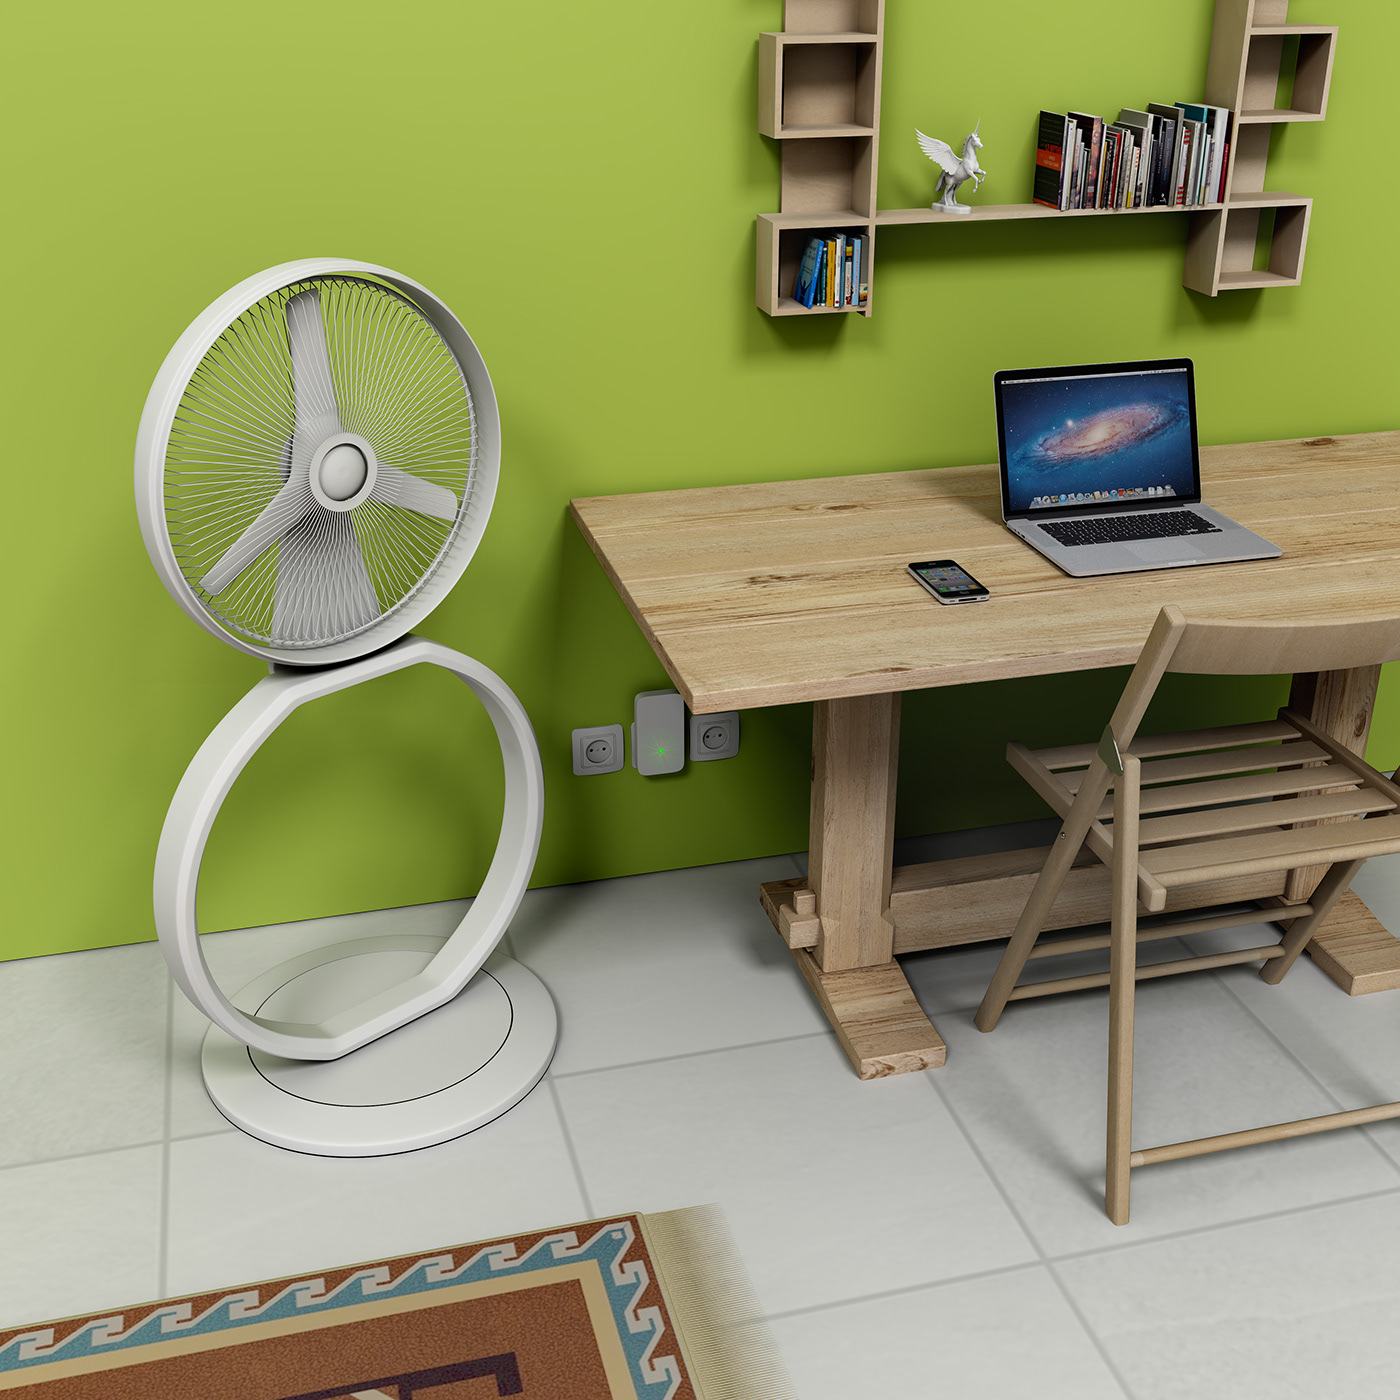 fan wireless compact product design  Packaging 3D Modelling modeling rendering interior design  roozbehdesign